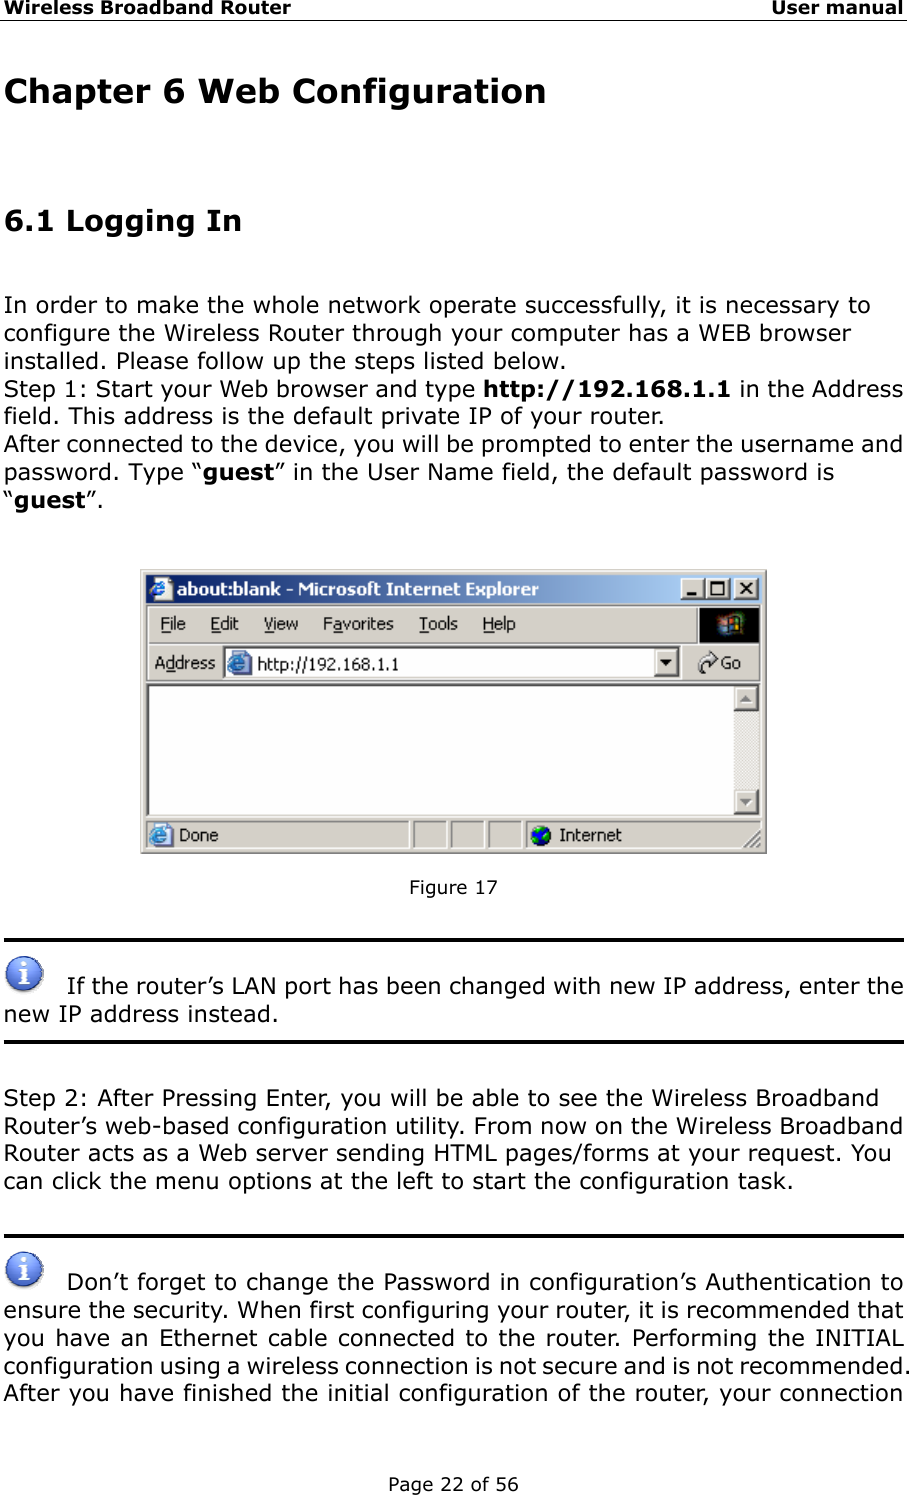 Wireless Broadband Router                                                   User manual Page 22 of 56 Chapter 6 Web Configuration 6.1 Logging In   In order to make the whole network operate successfully, it is necessary to configure the Wireless Router through your computer has a WEB browser installed. Please follow up the steps listed below. Step 1: Start your Web browser and type http://192.168.1.1 in the Address field. This address is the default private IP of your router. After connected to the device, you will be prompted to enter the username and password. Type “guest” in the User Name field, the default password is “guest”.     Figure 17         If the router’s LAN port has been changed with new IP address, enter the new IP address instead.   Step 2: After Pressing Enter, you will be able to see the Wireless Broadband Router’s web-based configuration utility. From now on the Wireless Broadband Router acts as a Web server sending HTML pages/forms at your request. You can click the menu options at the left to start the configuration task.      Don’t forget to change the Password in configuration’s Authentication to ensure the security. When first configuring your router, it is recommended that you have an Ethernet cable connected to the router. Performing the INITIAL configuration using a wireless connection is not secure and is not recommended. After you have finished the initial configuration of the router, your connection 